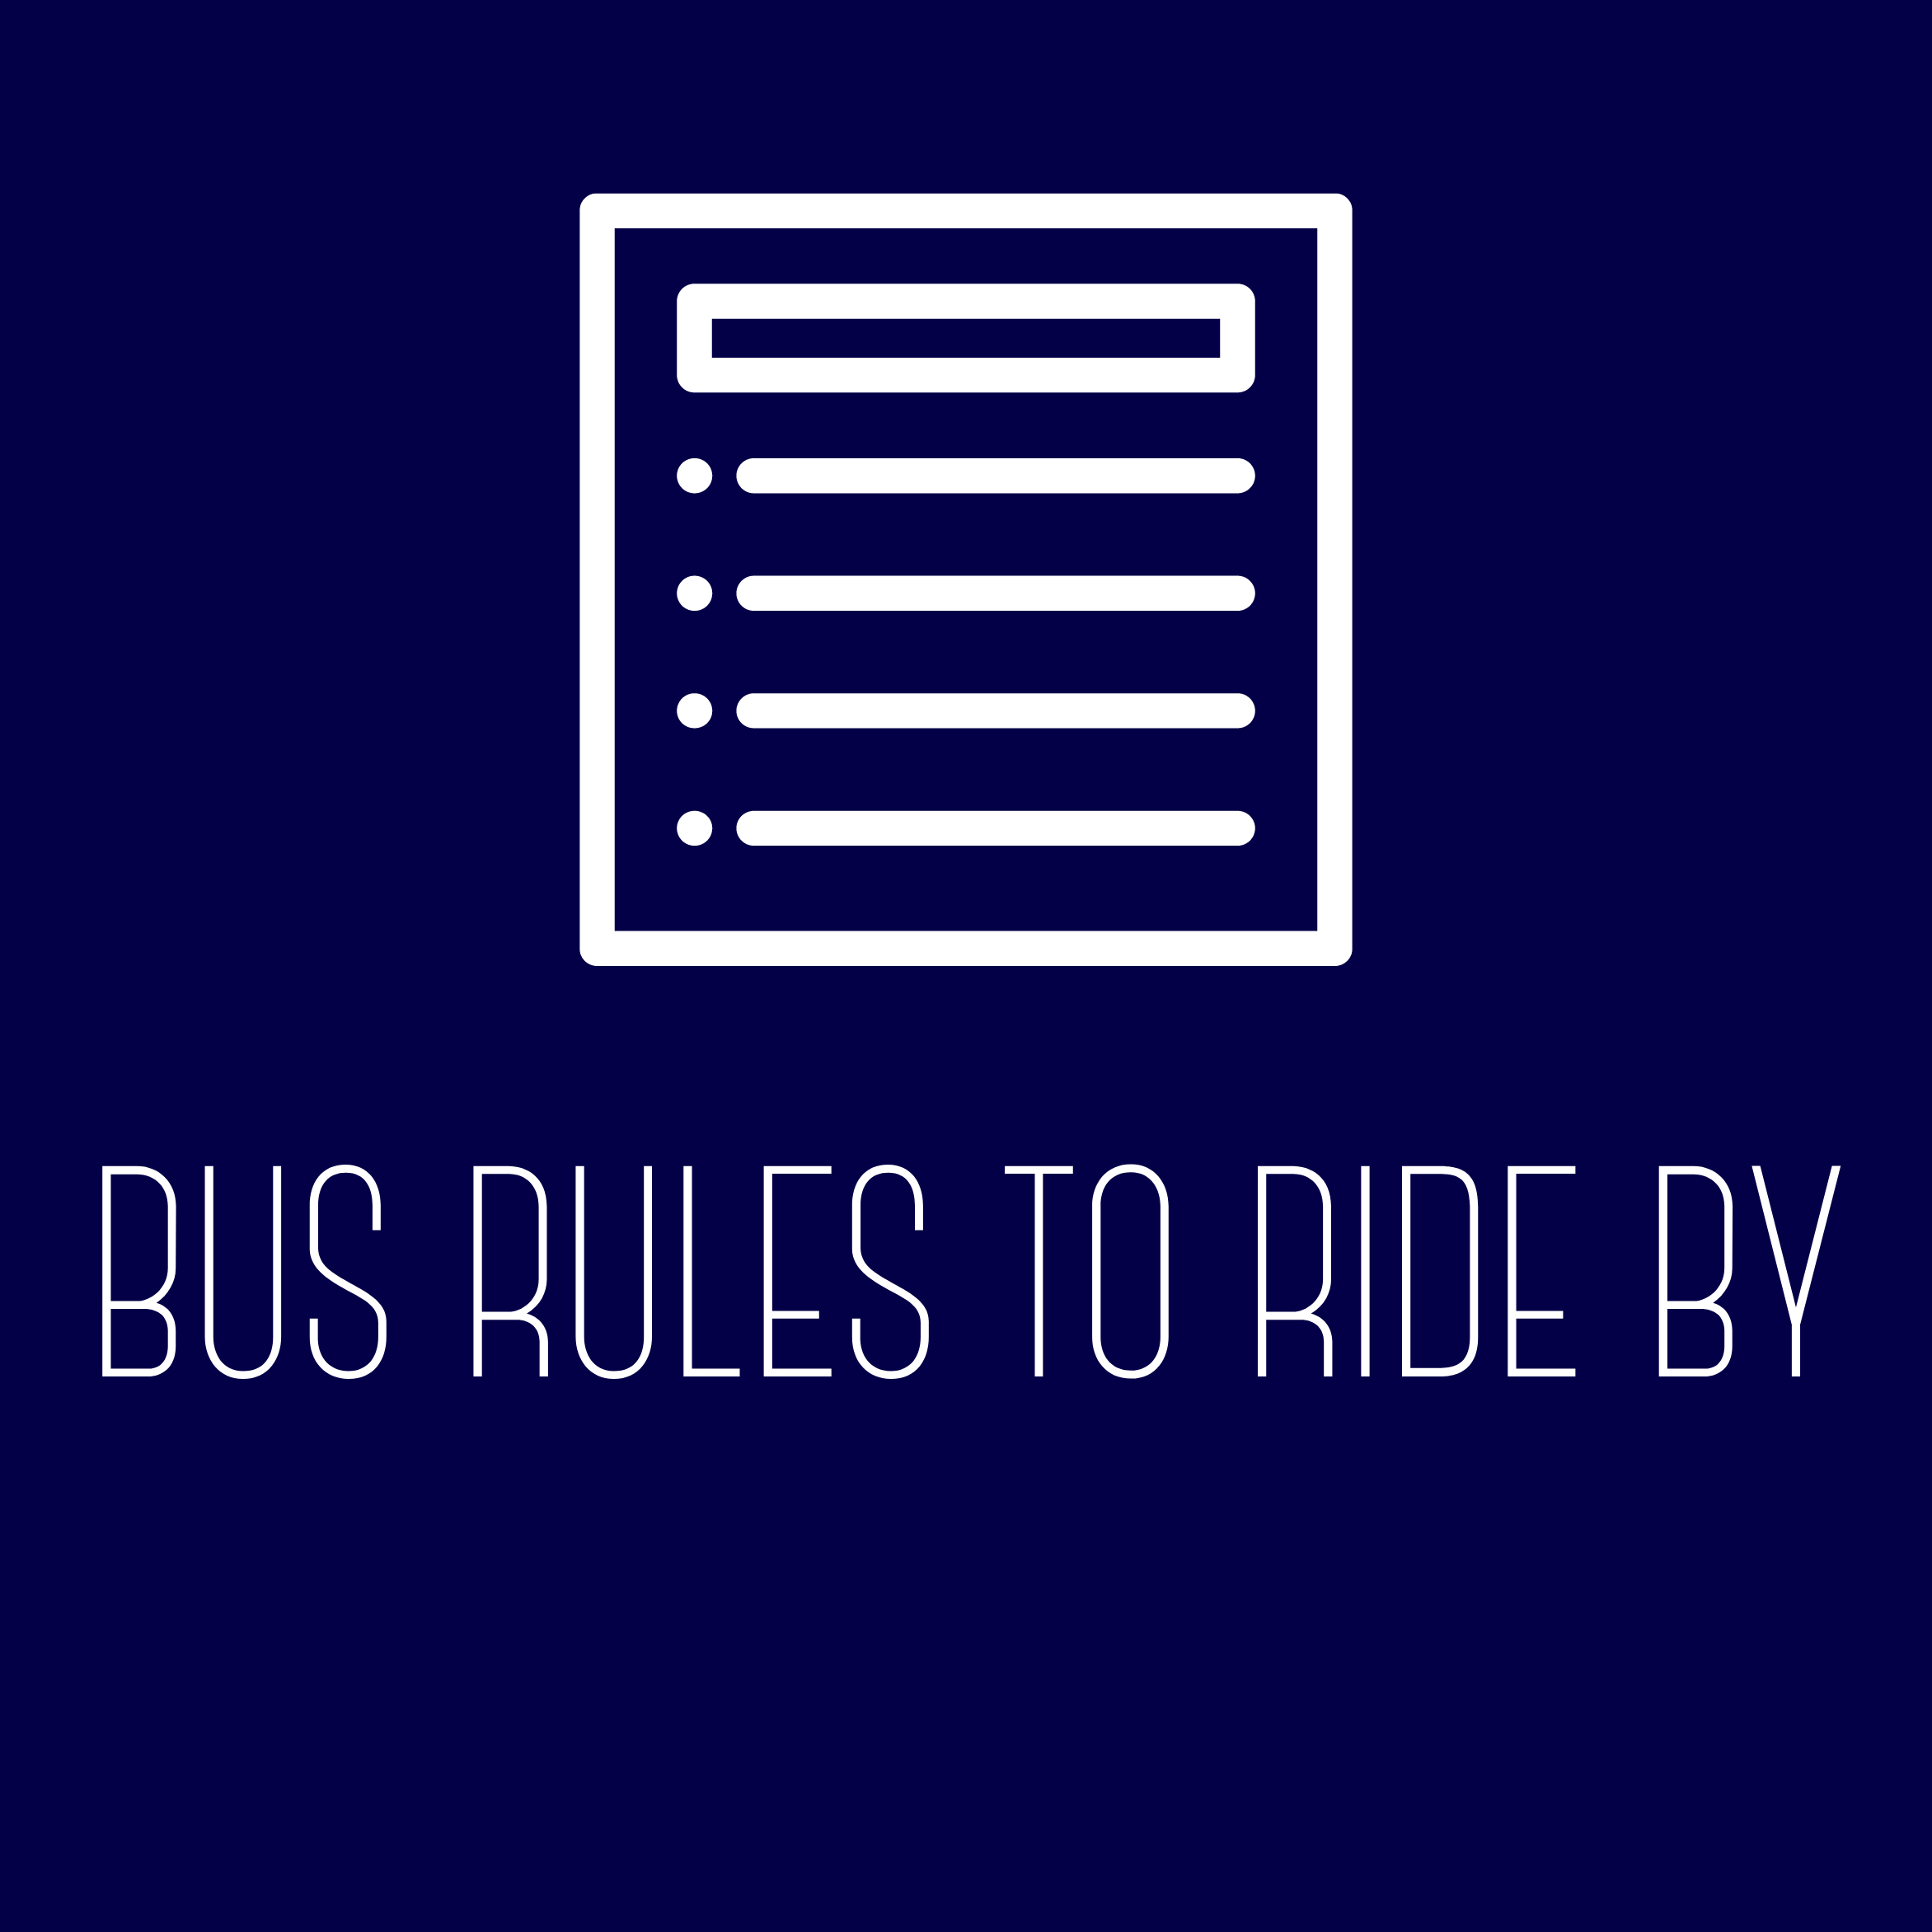 Bus Rules to Ride By